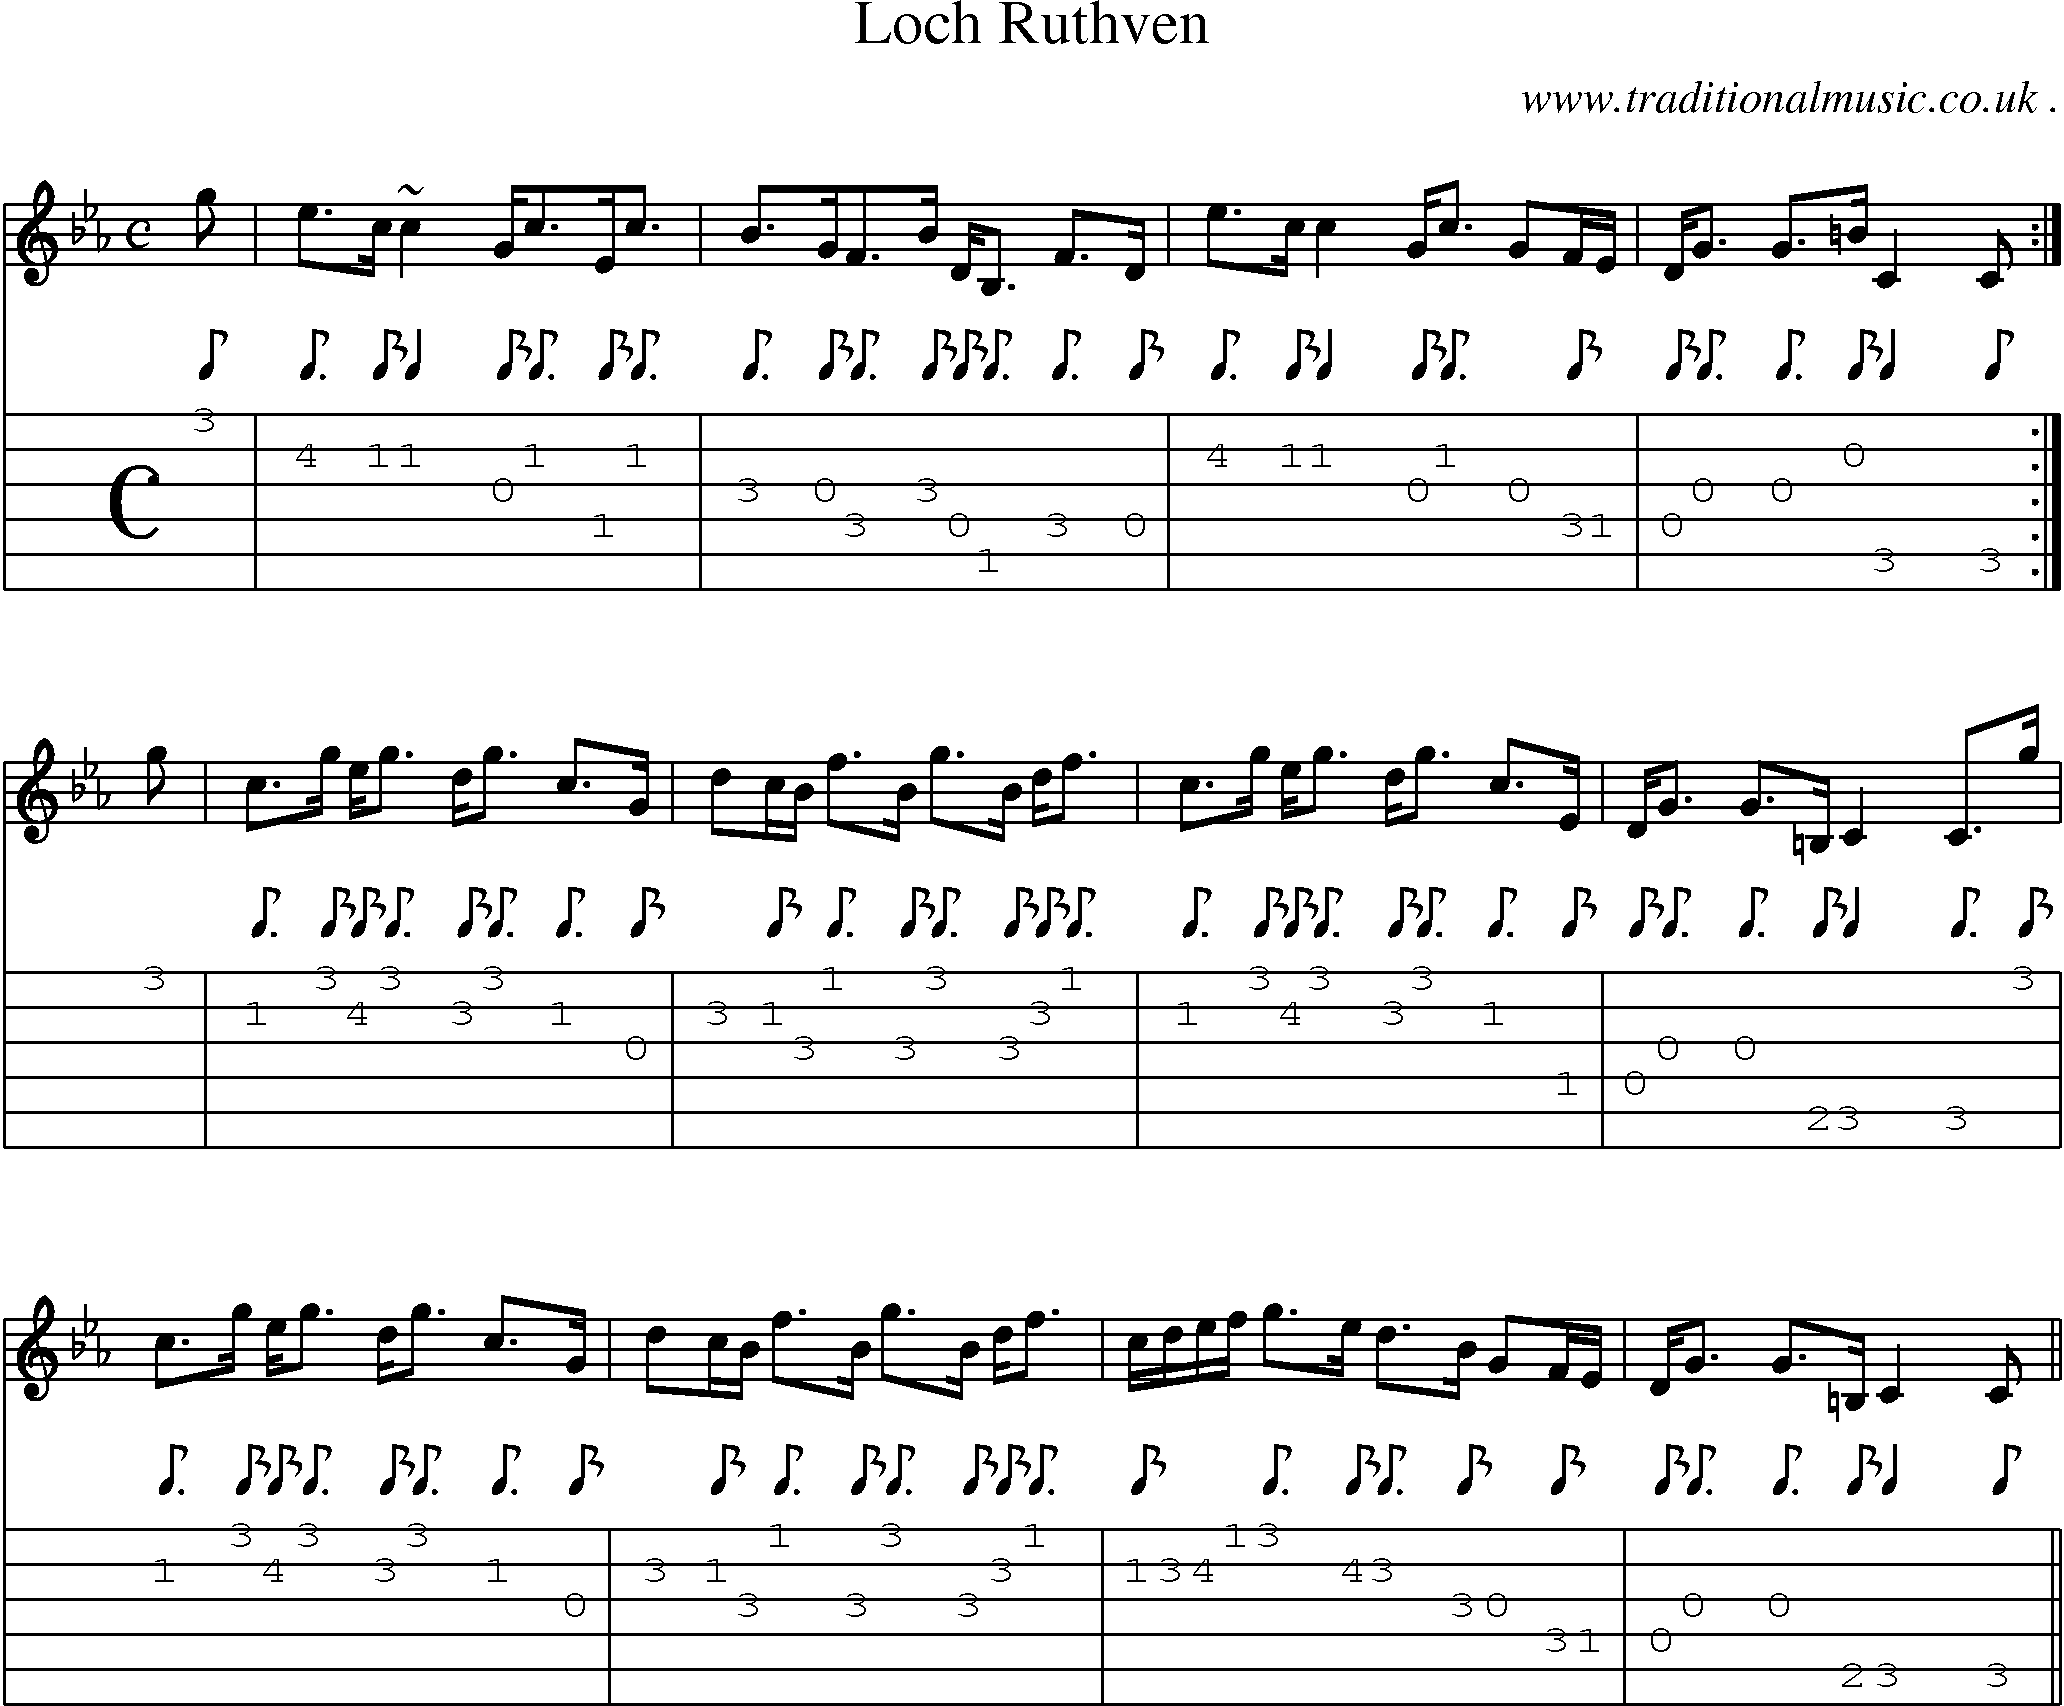 Sheet-music  score, Chords and Guitar Tabs for Loch Ruthven